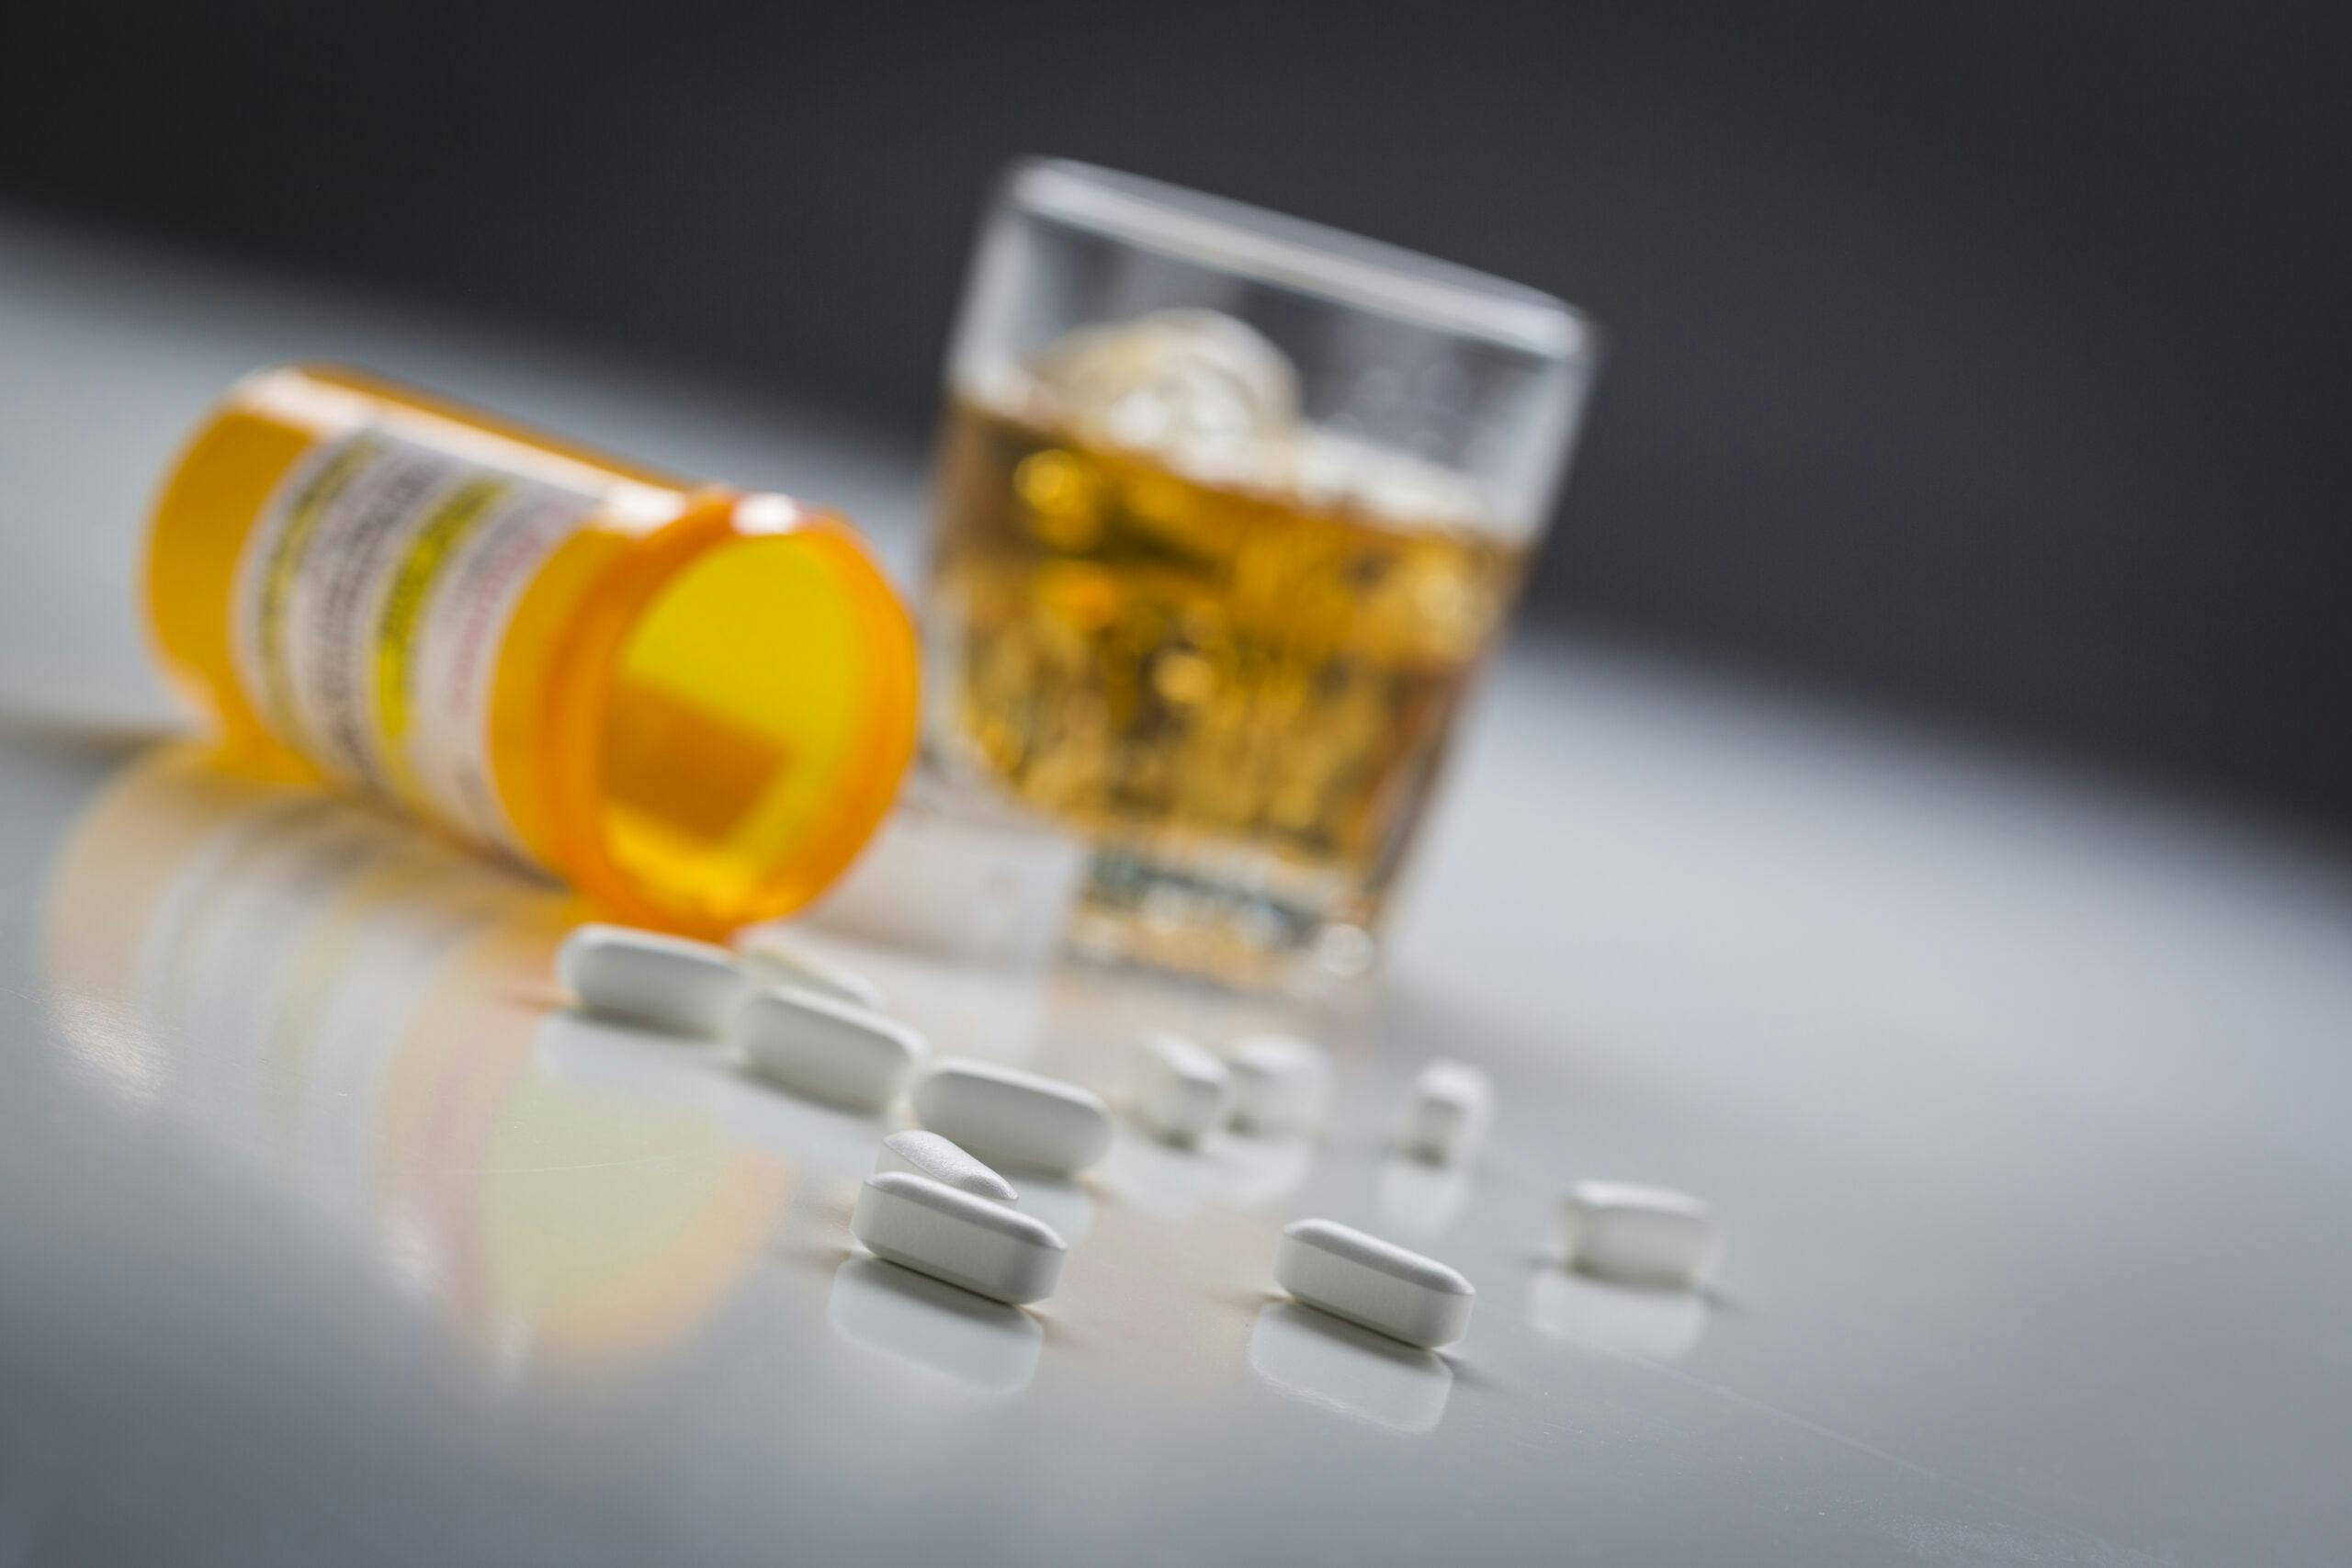 white prescription pills spilled out with glass of liquor